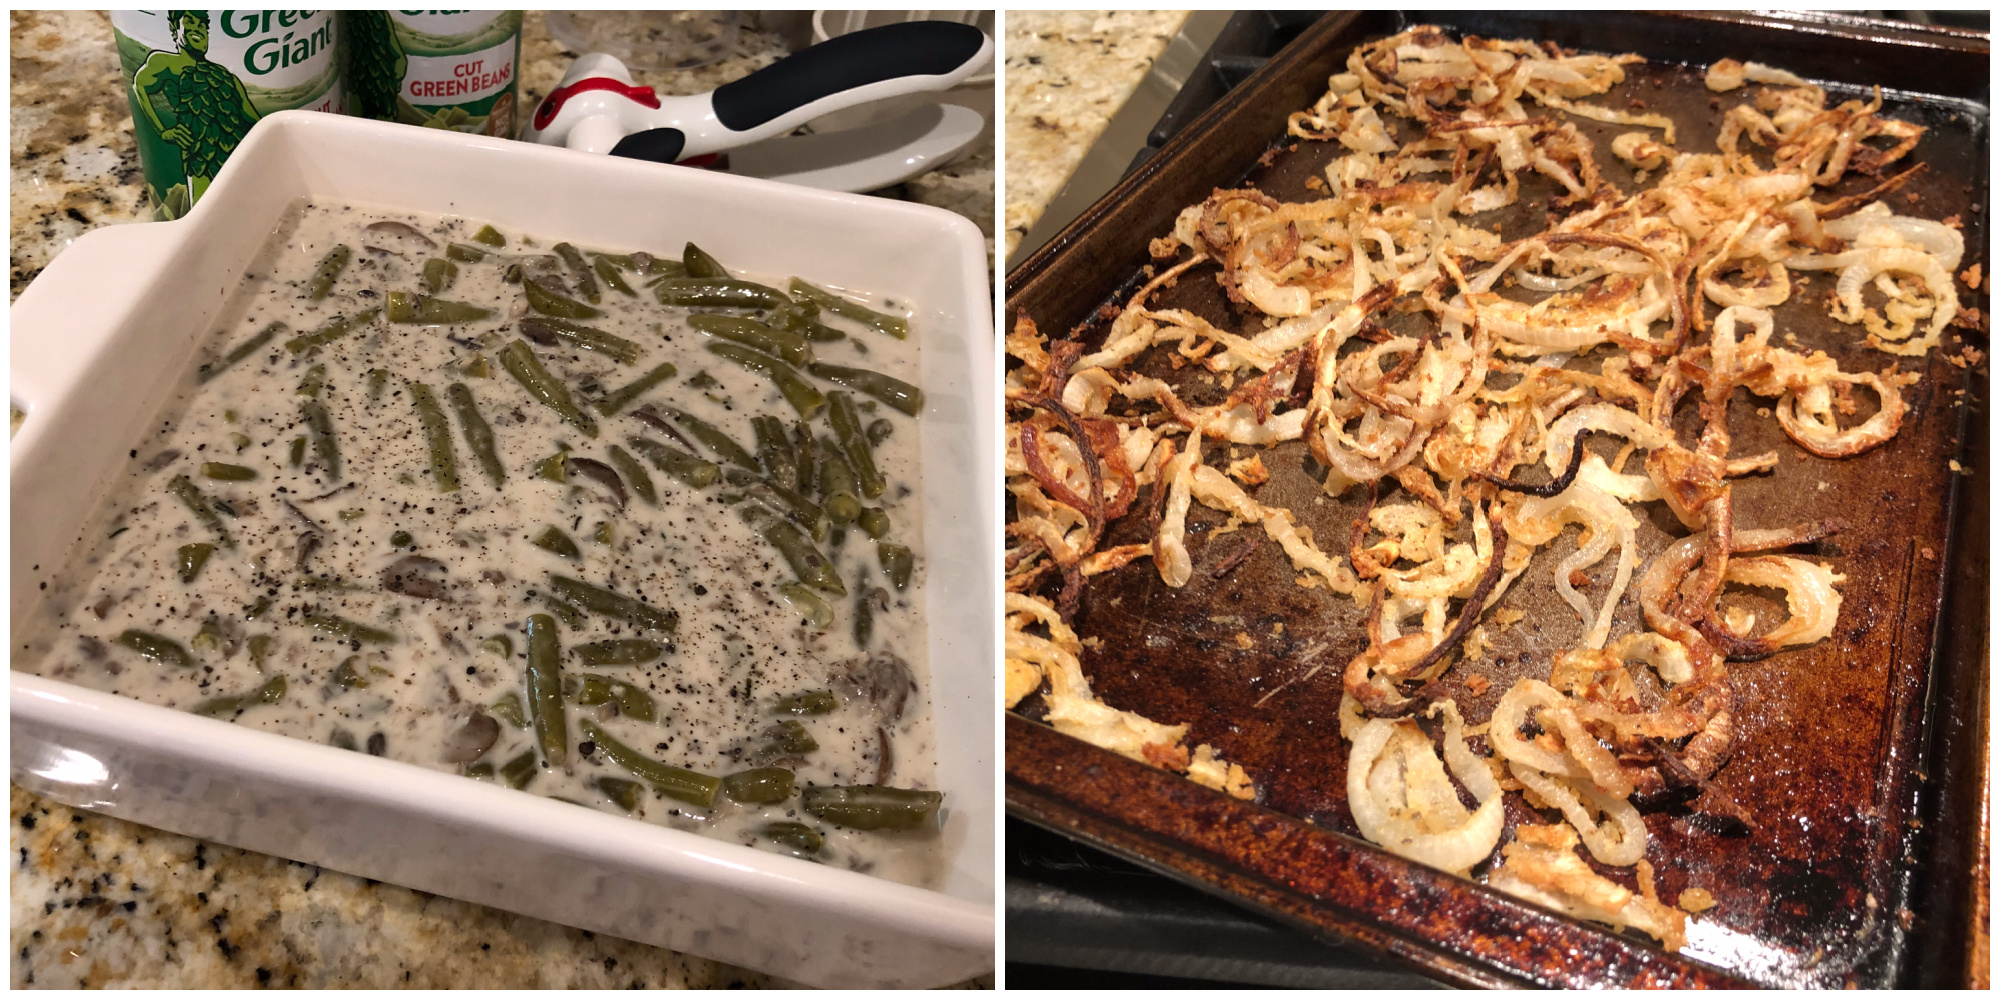 Try My Scratch-Made Green Bean Casserole & Save On Green Giant Vegetables At Publix on I Heart Publix 1